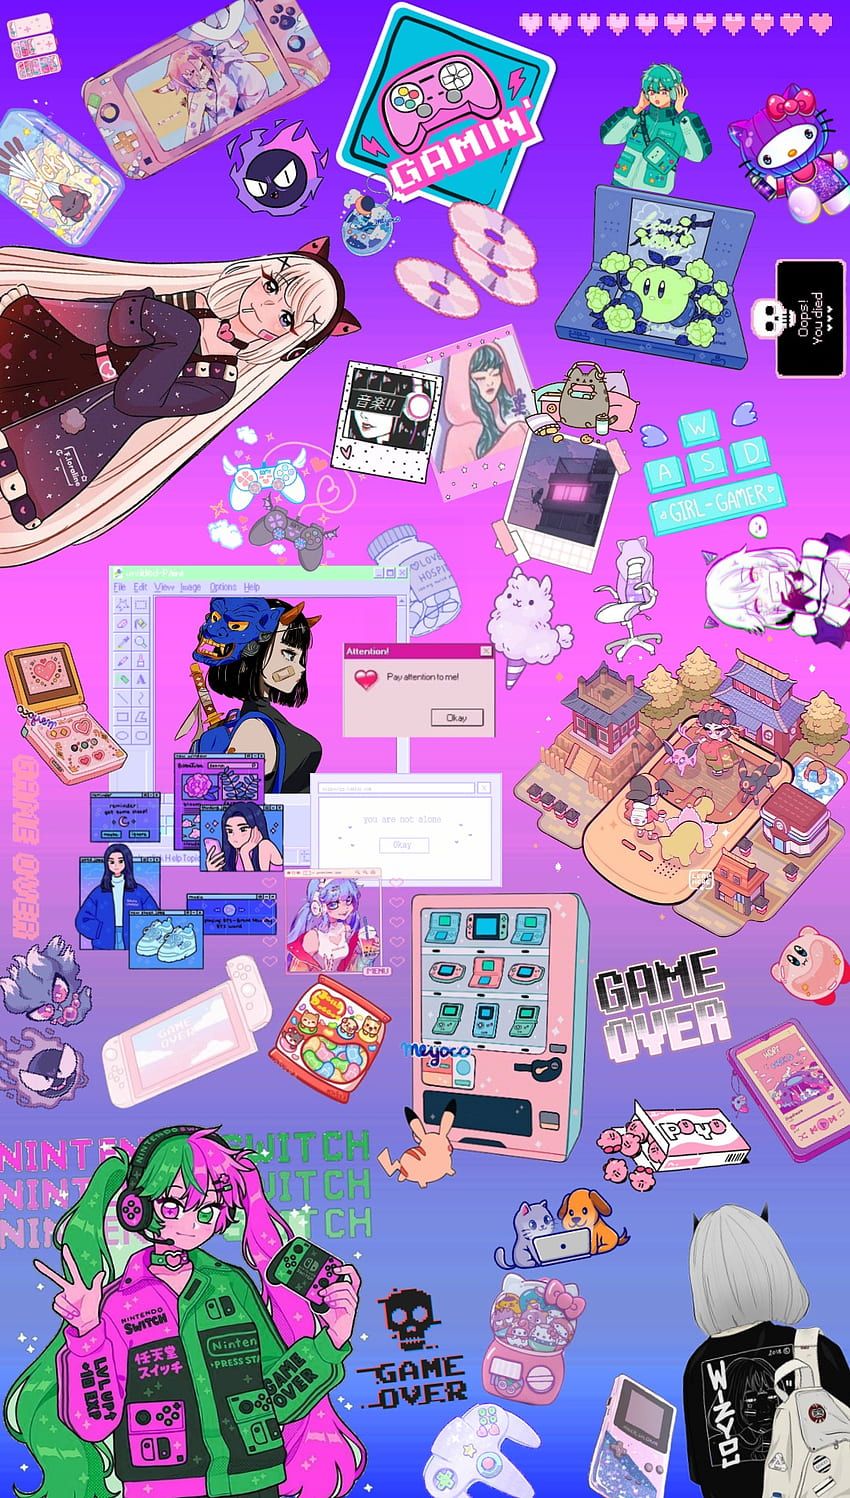 Aesthetic wallpaper for phone with many stickers of video games, anime, and other things. - Gaming